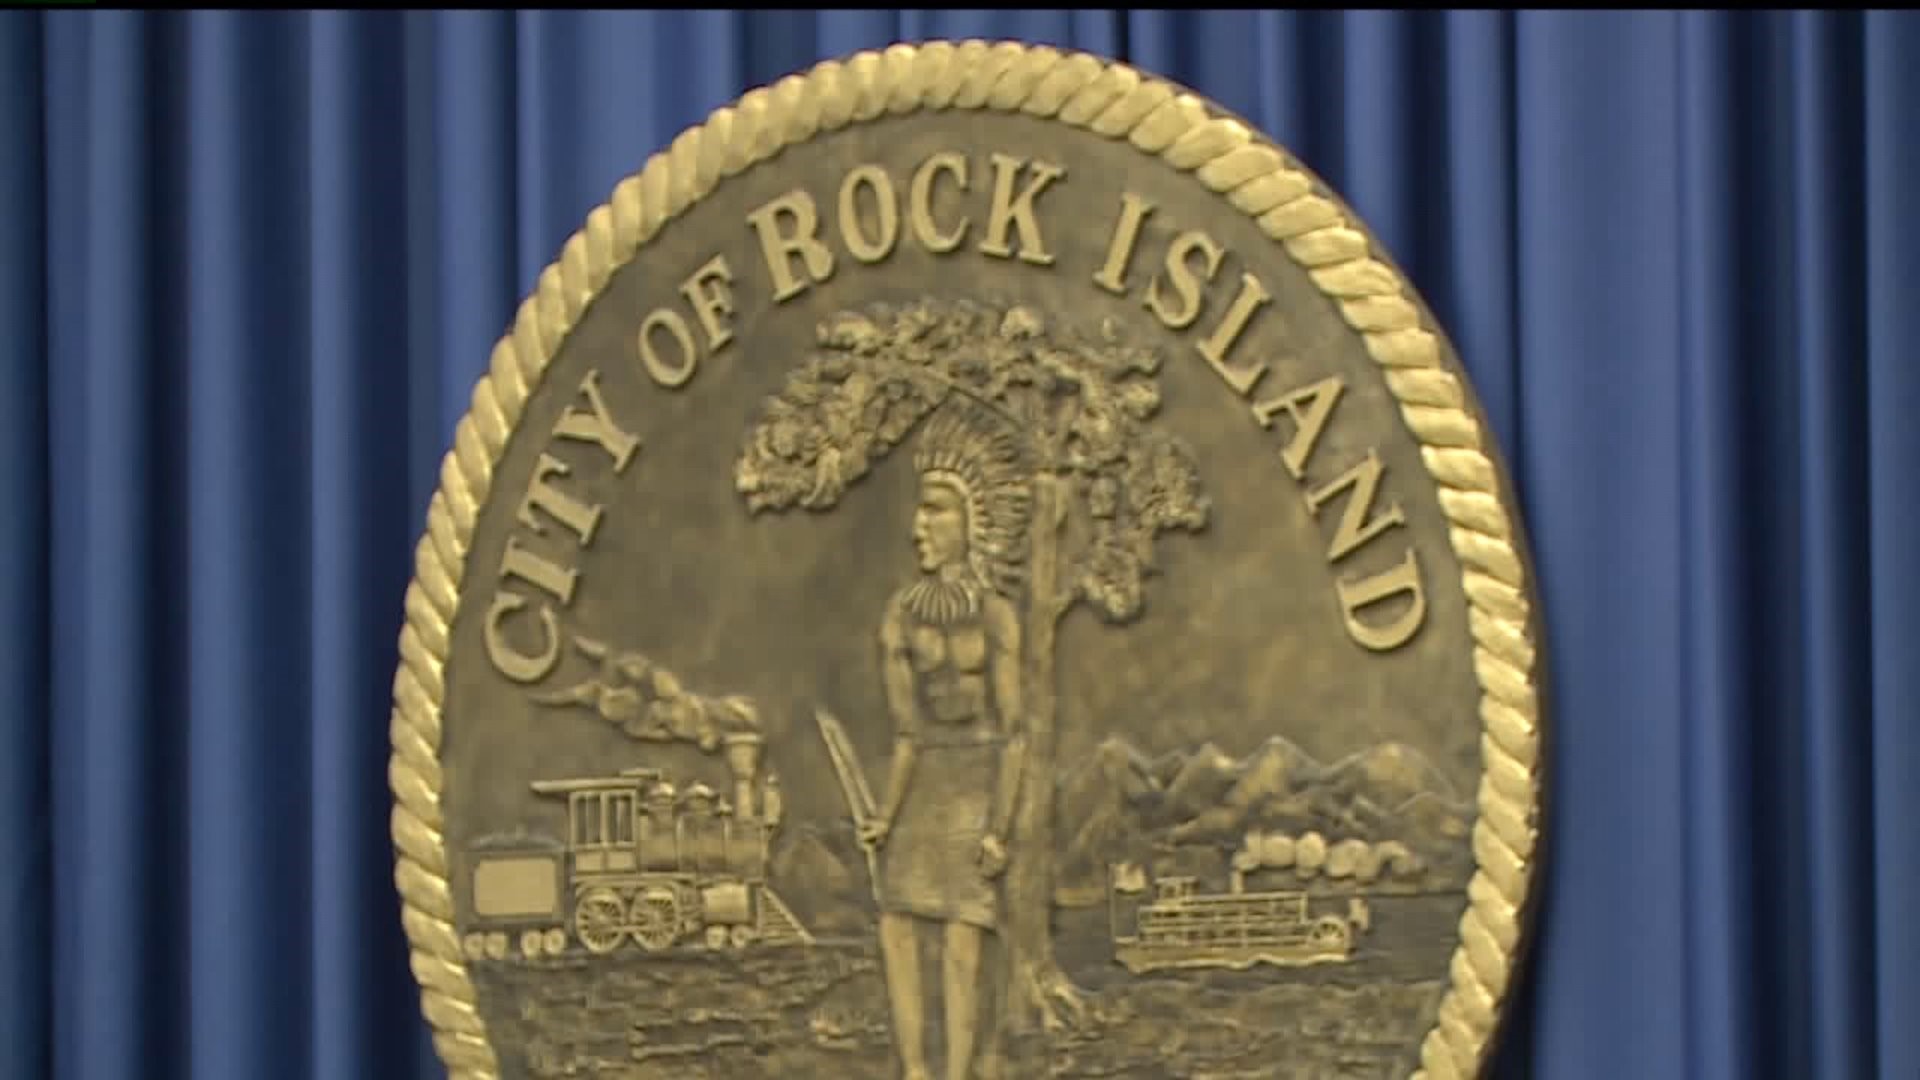 Rock Island`s City Clerk is stepping down